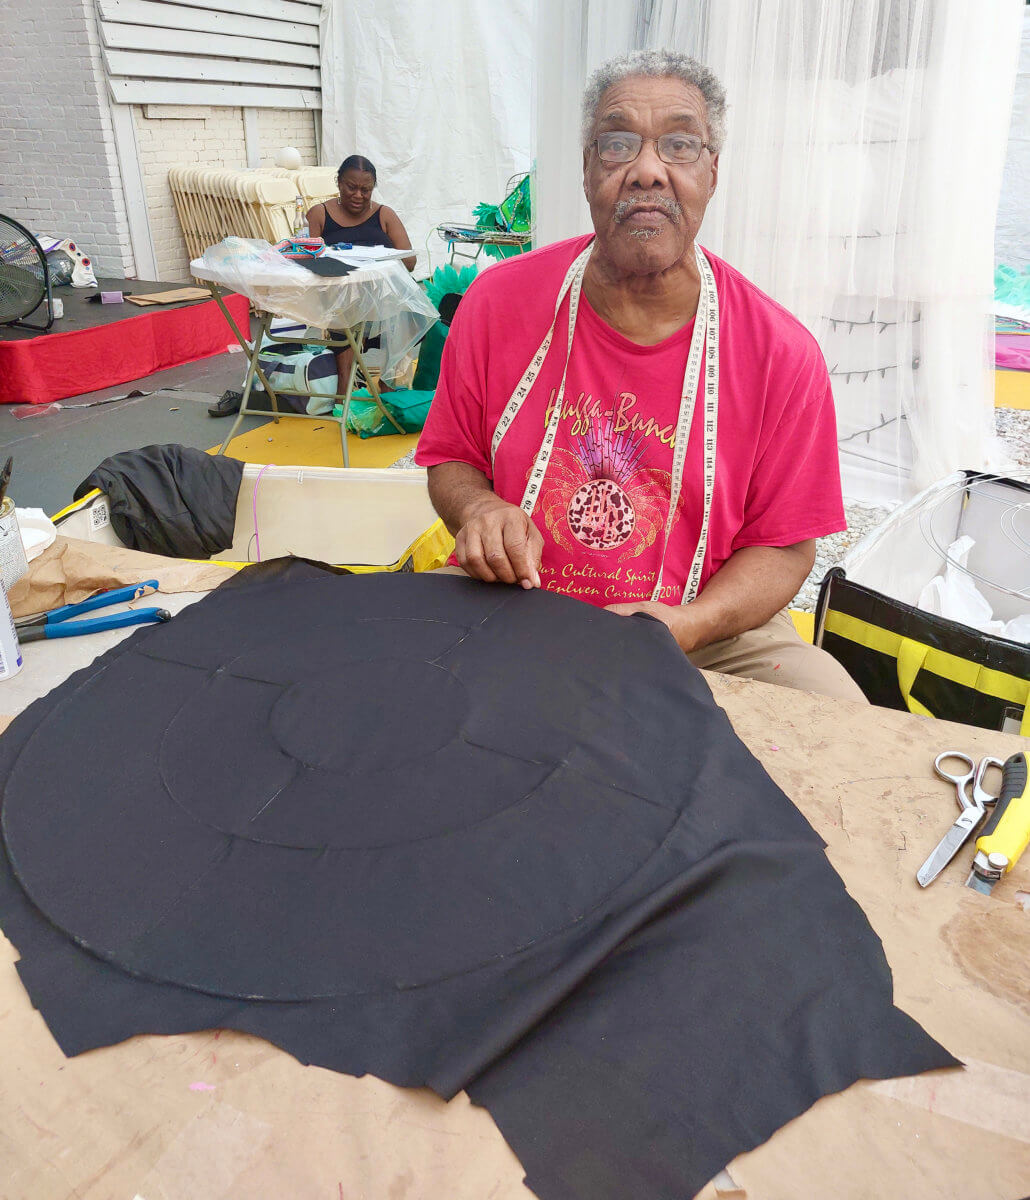 Costume designer Clifford Smith Jr. bends his way to carnival 2023